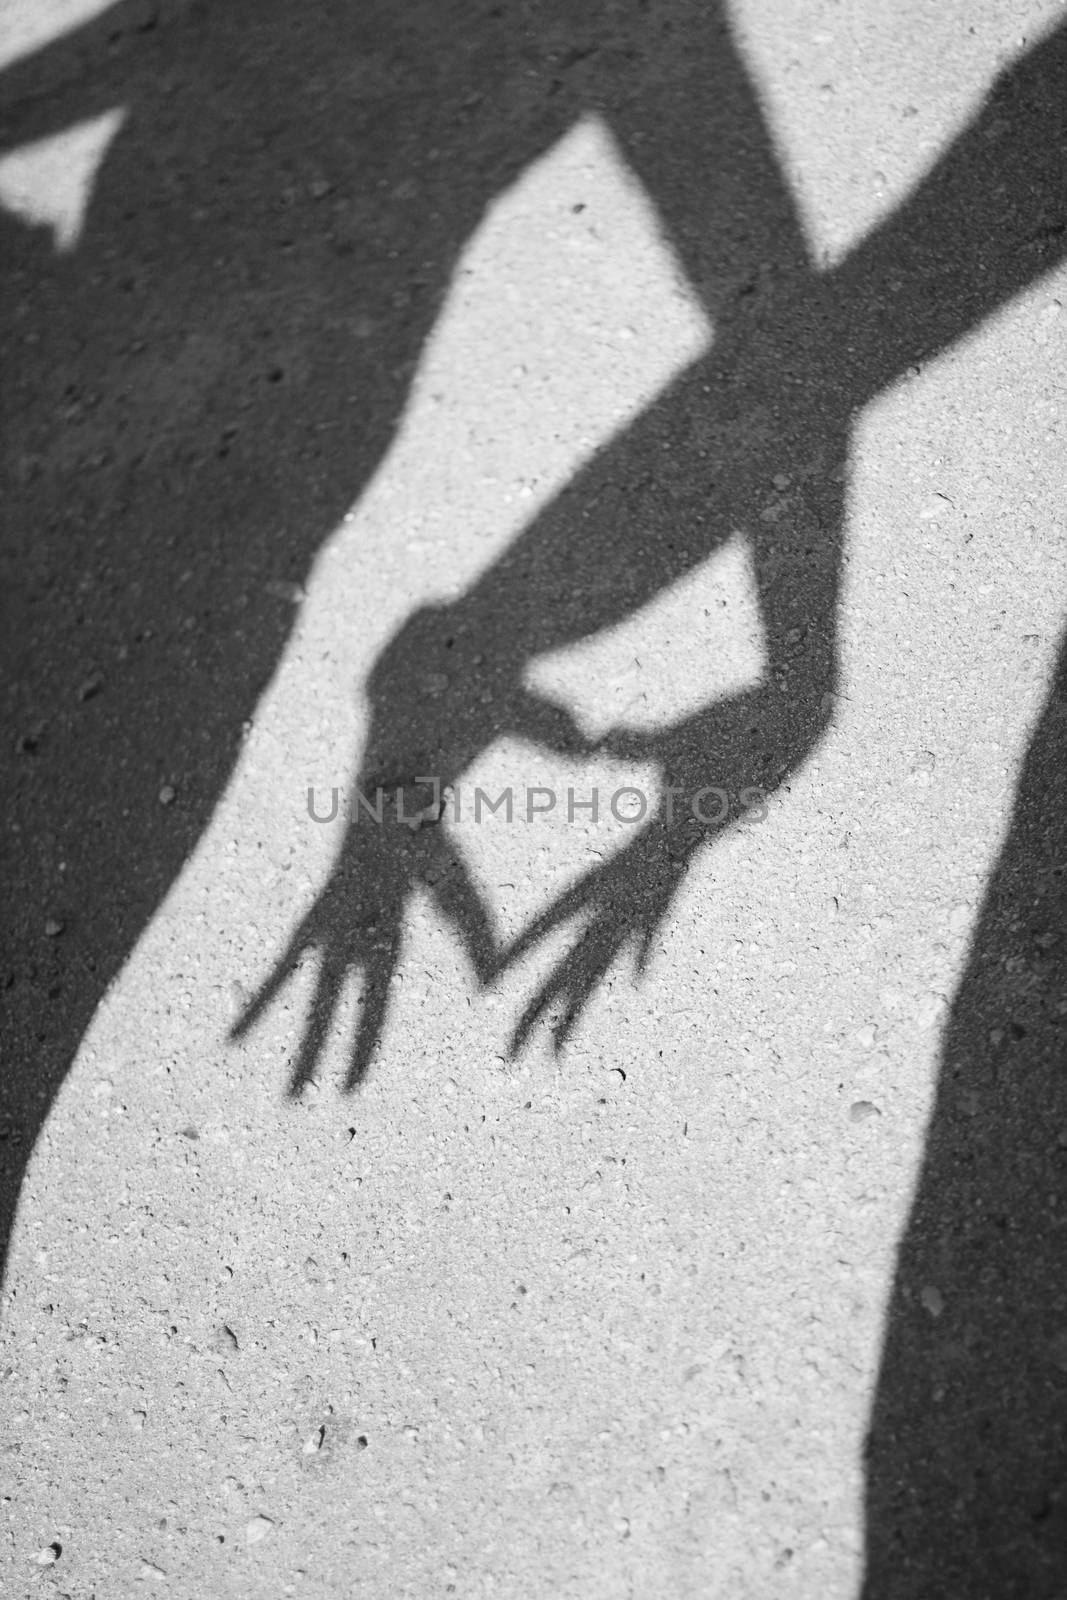 Two hands forming a heart shadow on the asphalt. Black and white photography